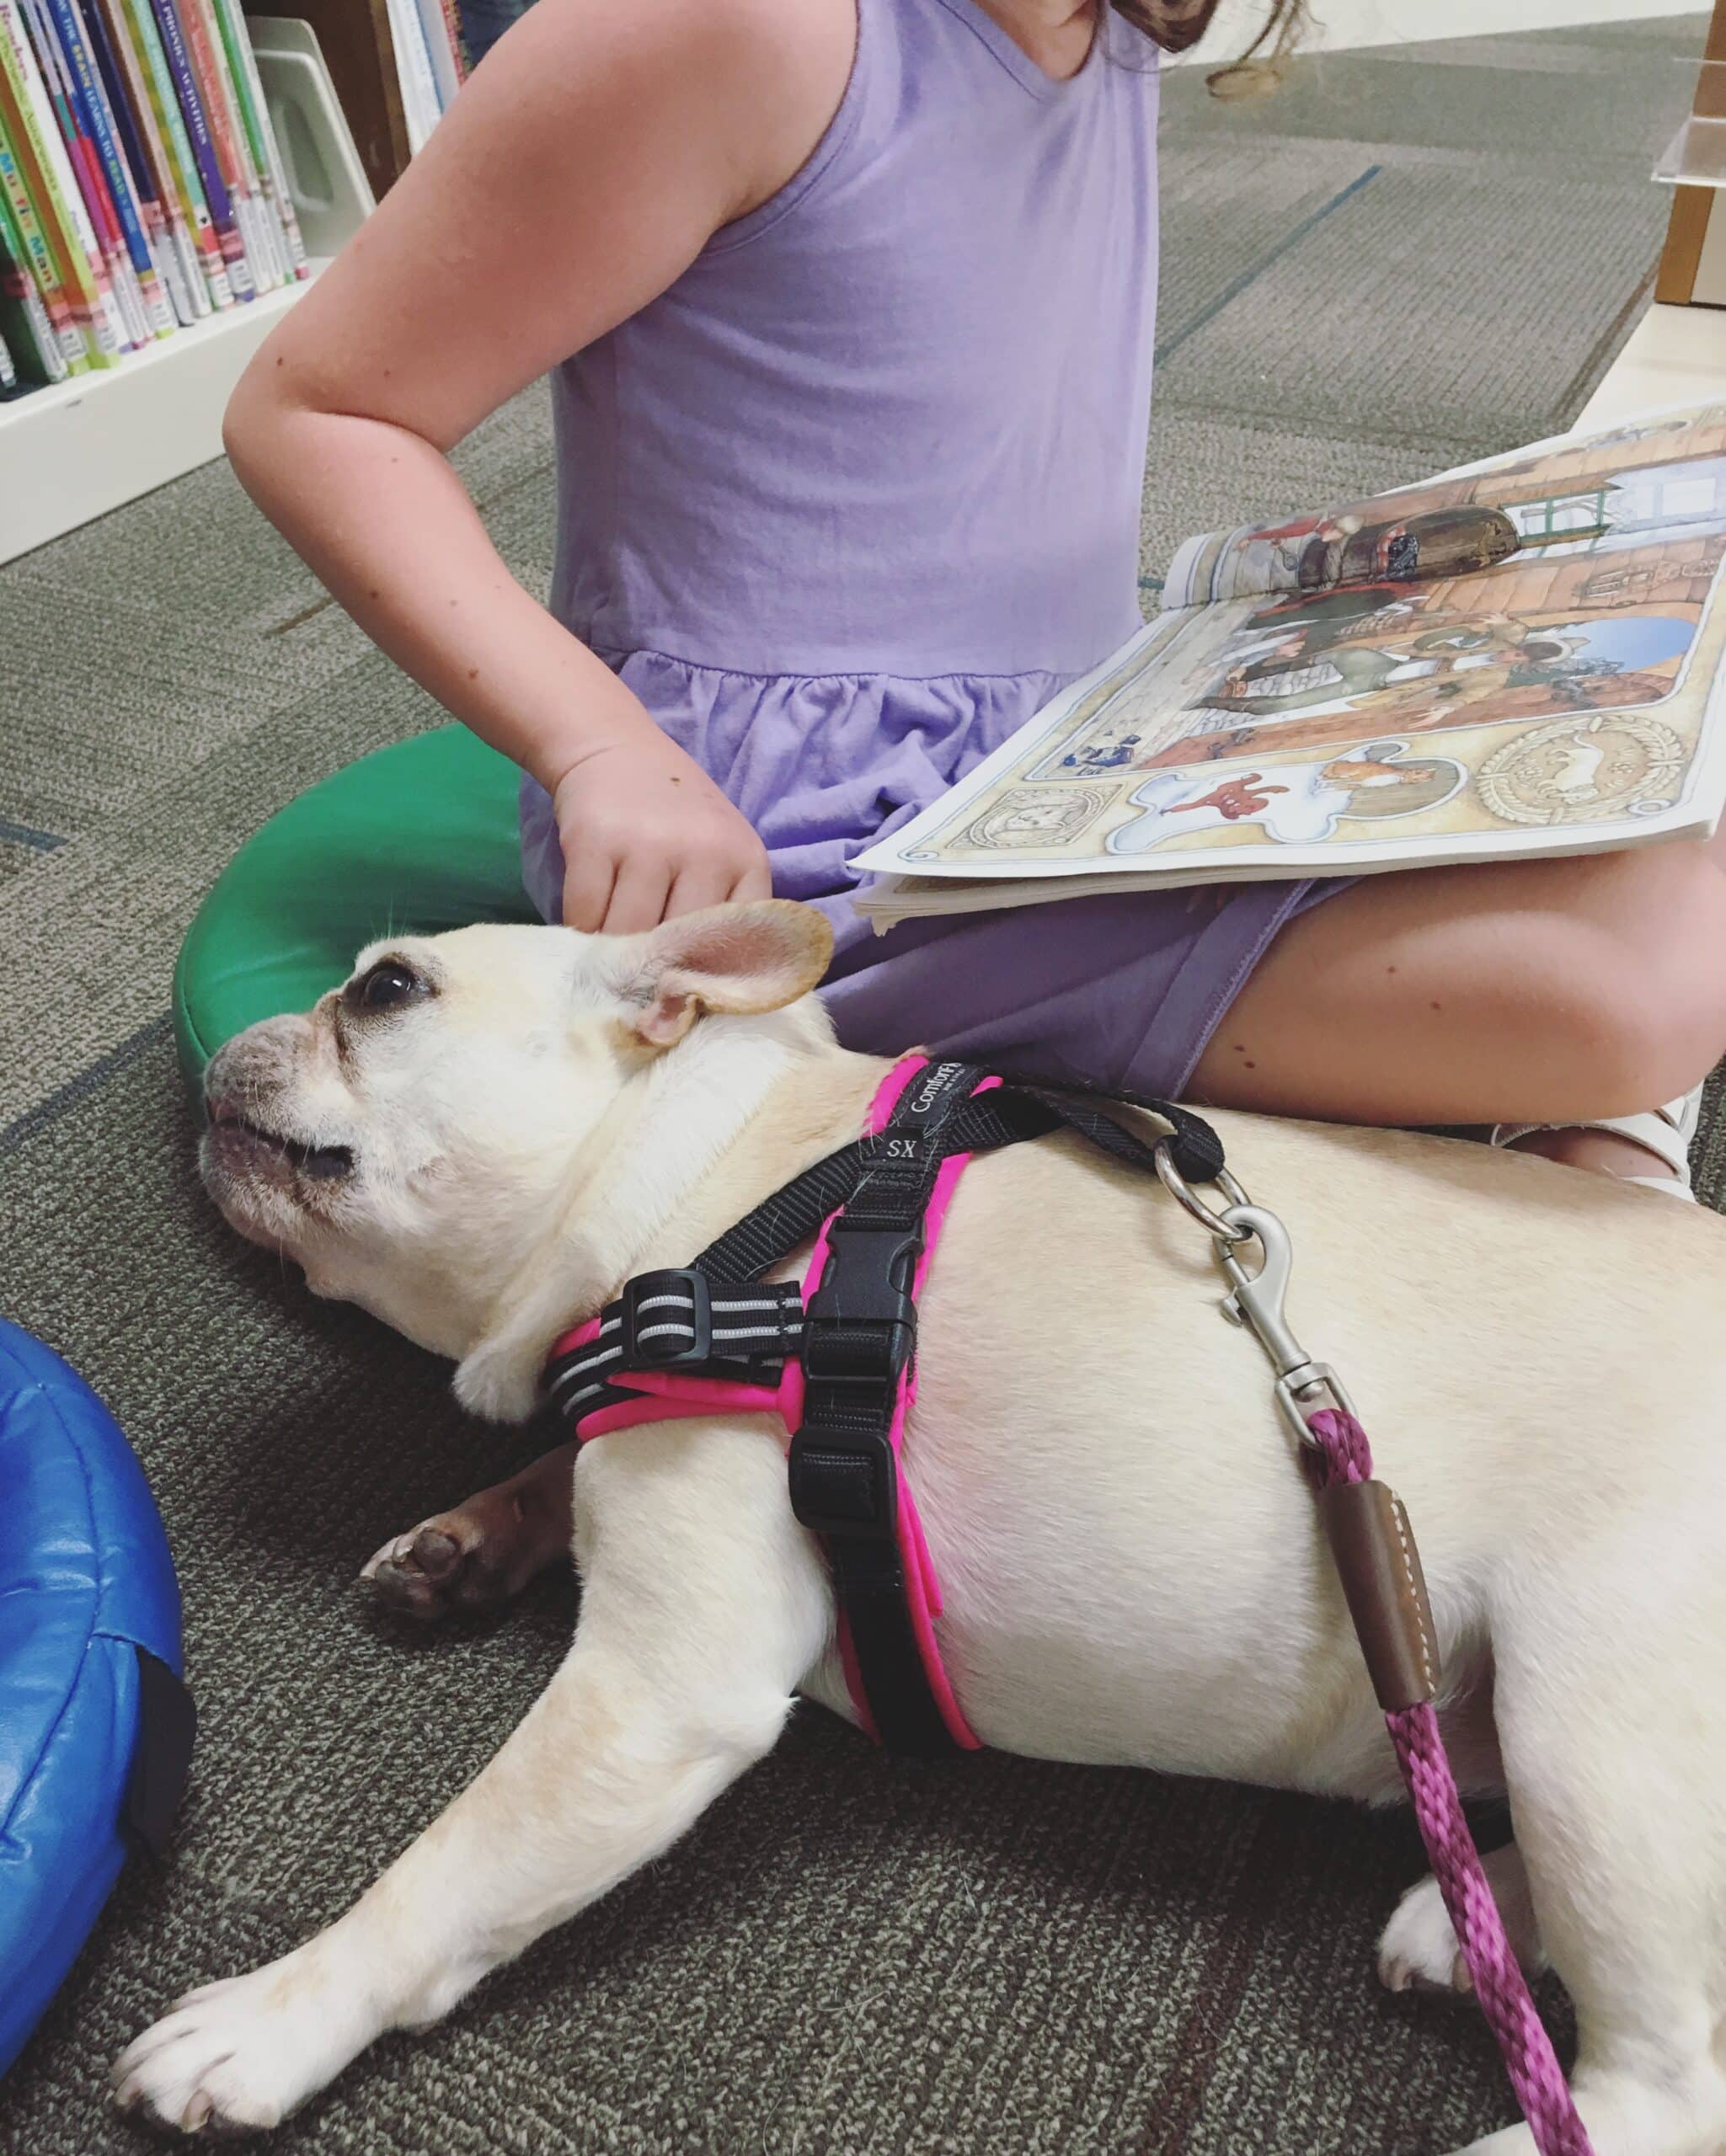 A child reading a book reaches out to pet a French bulldog therapy dog lying alongside.